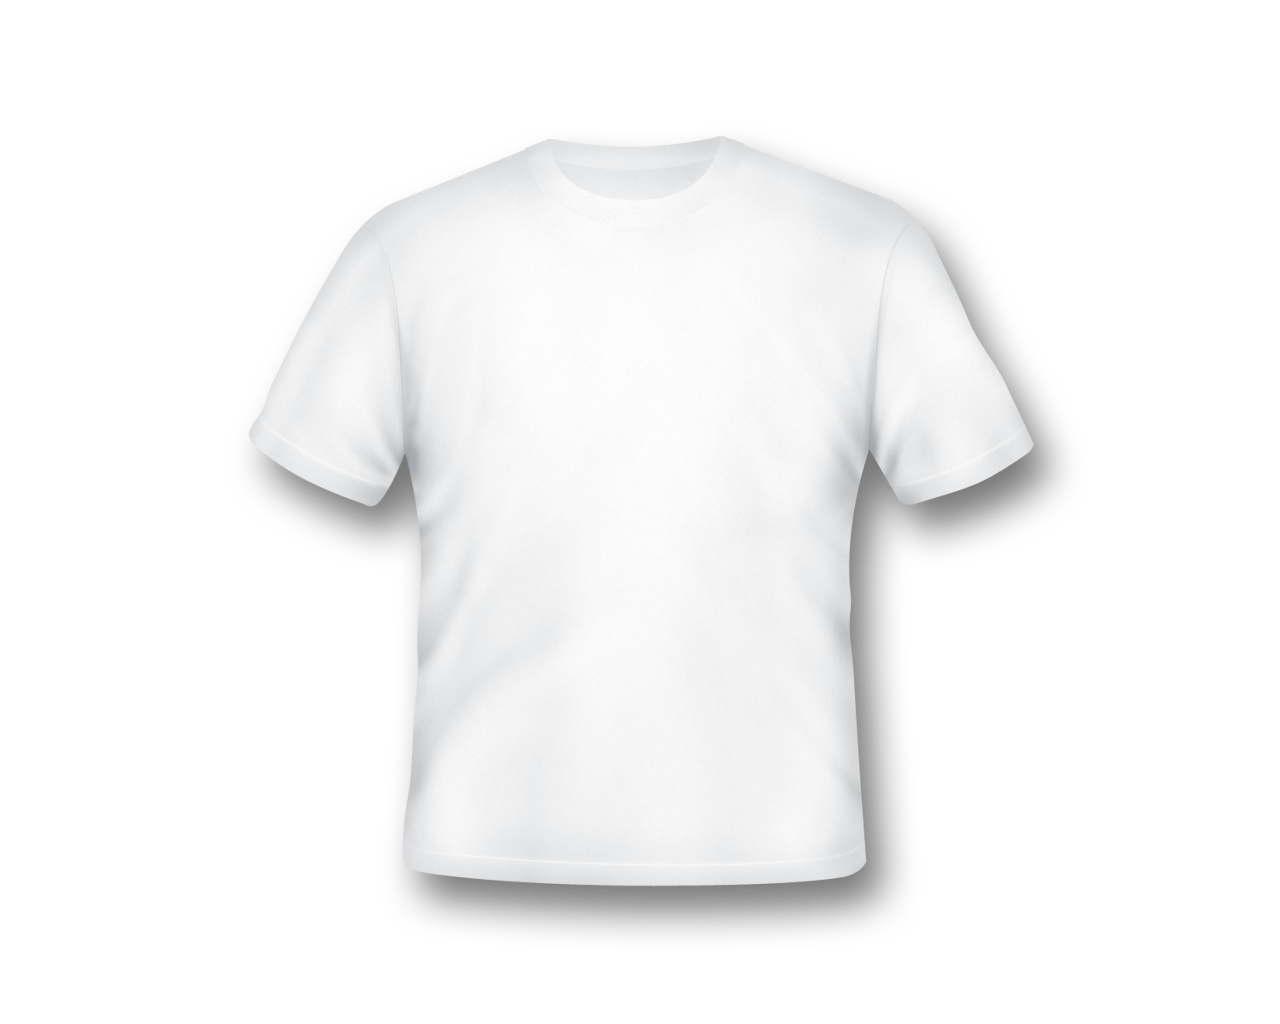 Lege witte t-shirt sjabloon PNG